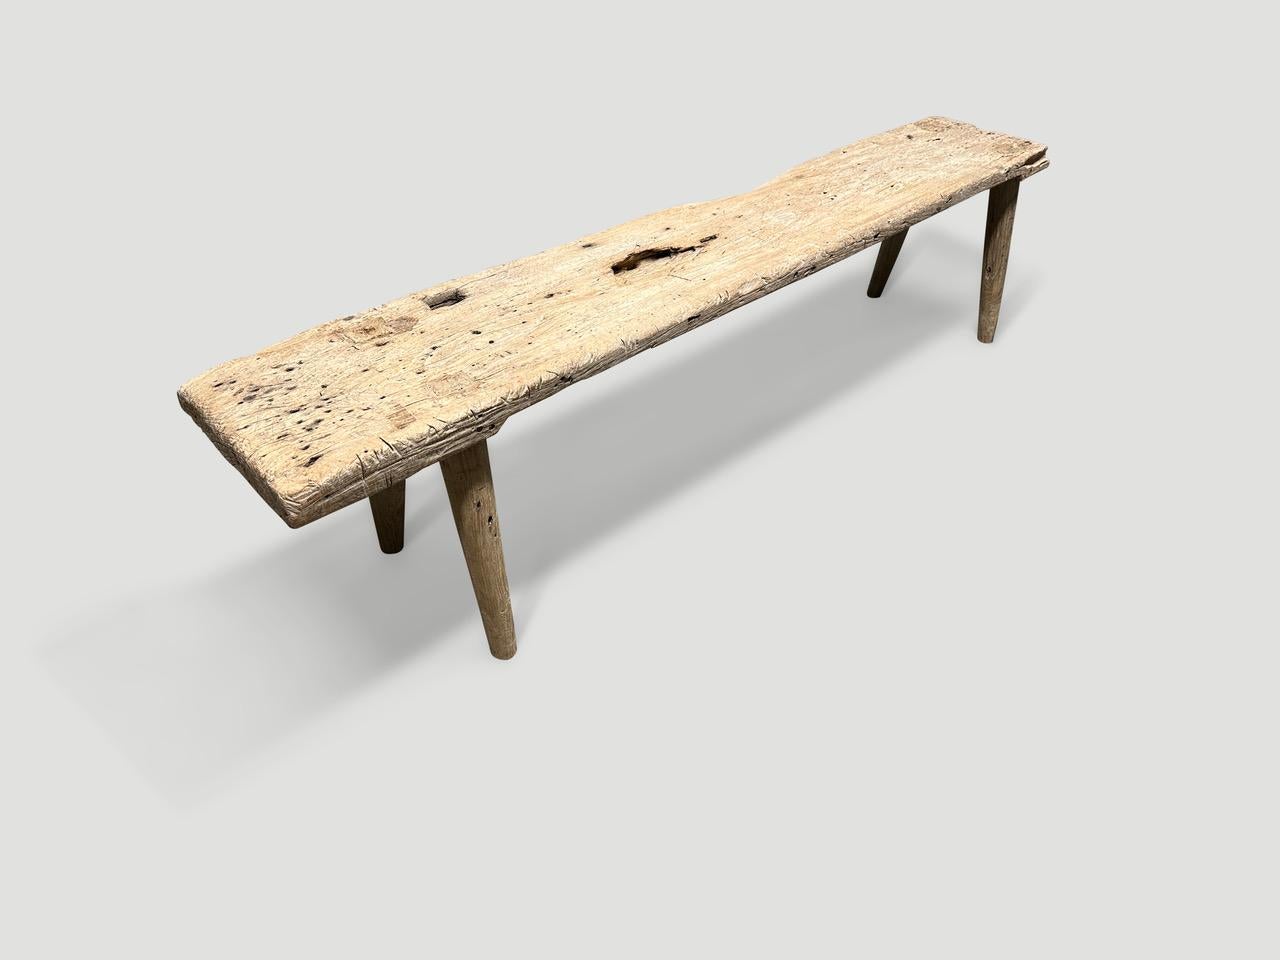 A single thick antique wood panel with lovely character. We added smooth teak minimalist legs to produce this beautiful bench and finished with a secret ingredient, revealing the unique wood grain. It’s all in the details.

This bench was handmade